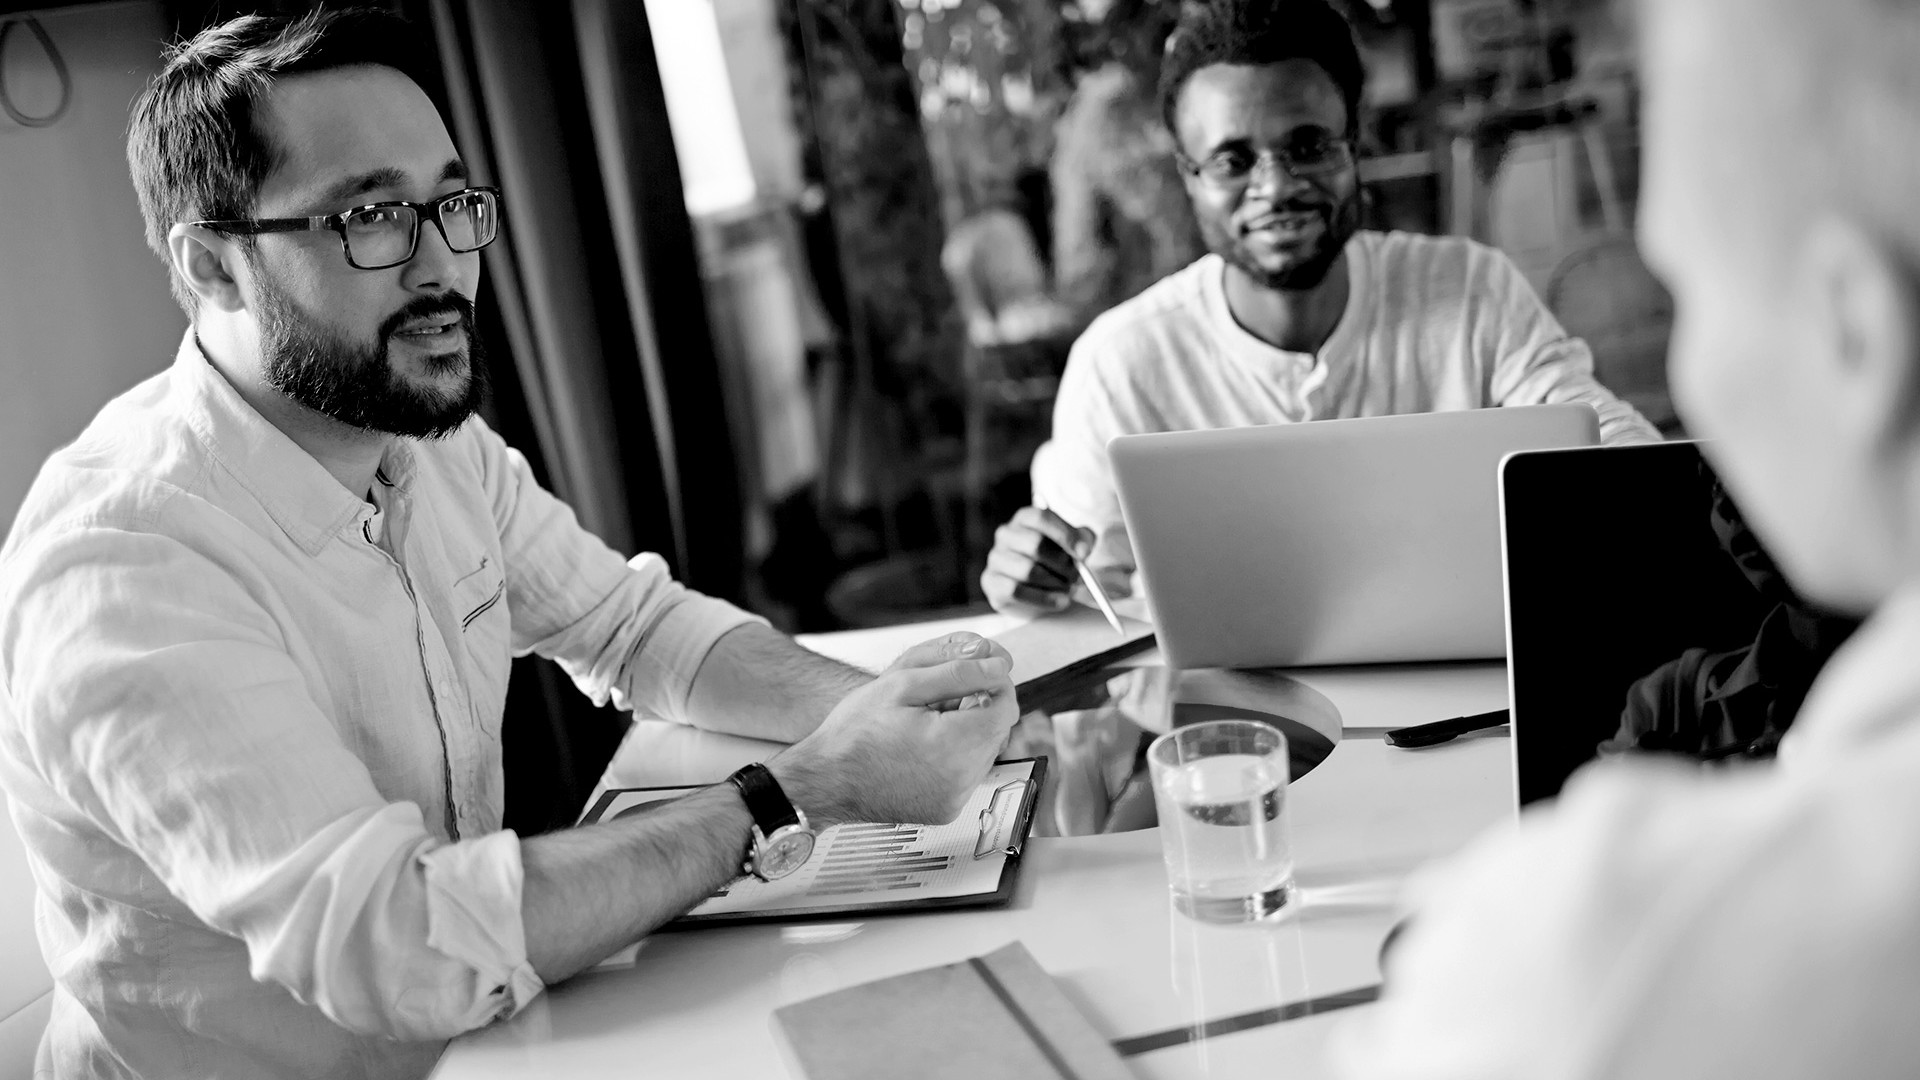 Building capabilities-Three men gathered around a table in black and white